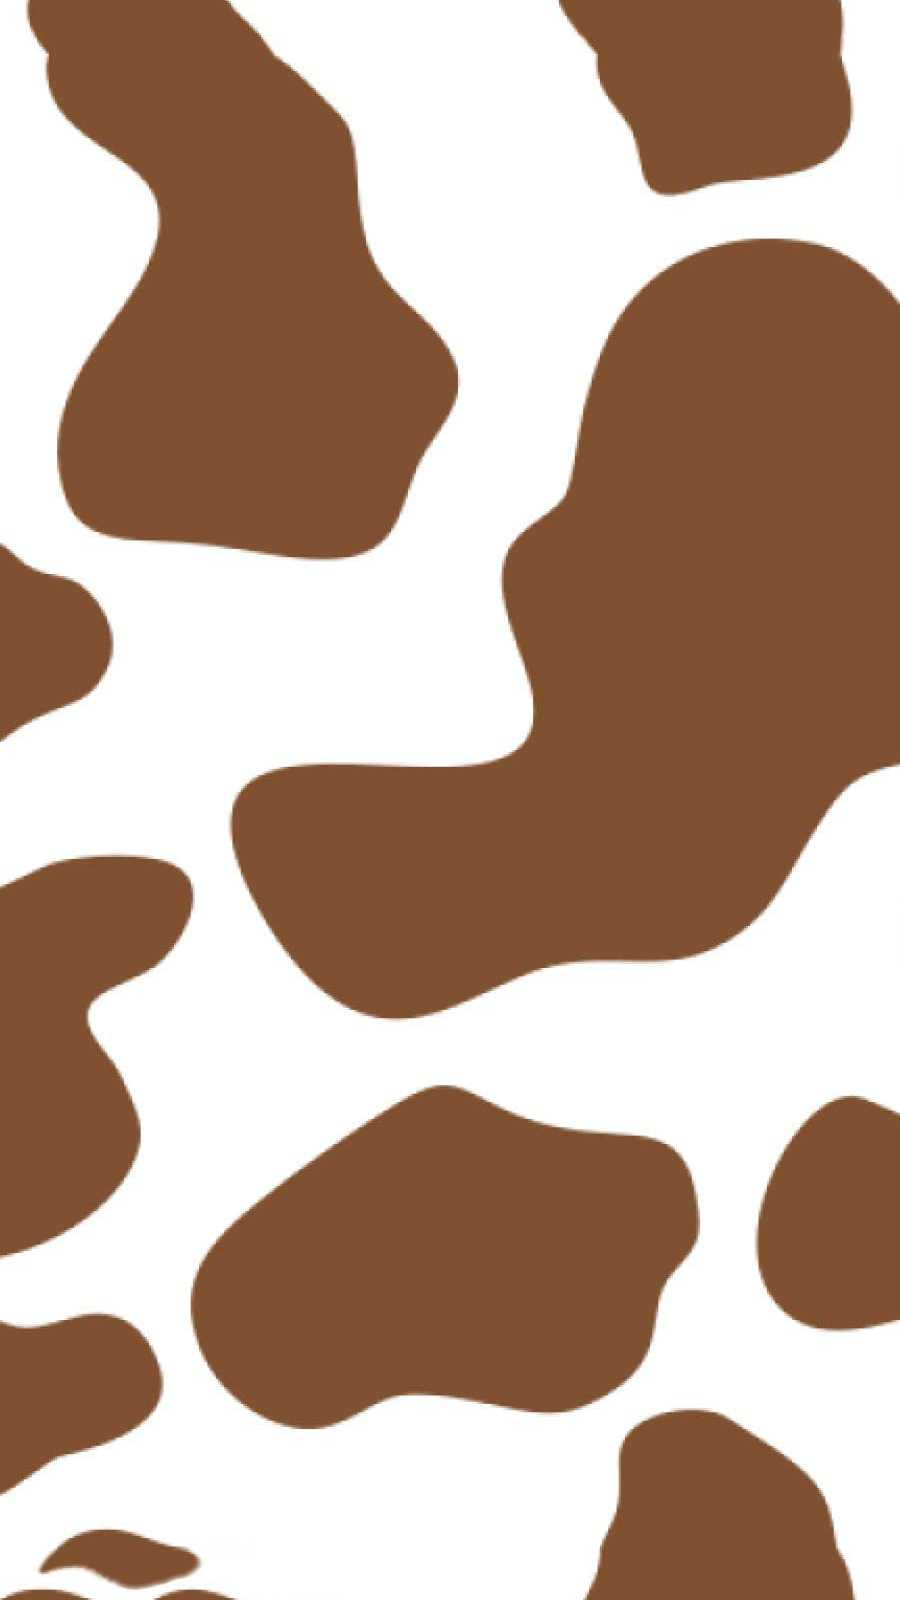 A brown and white cow pattern - Cow